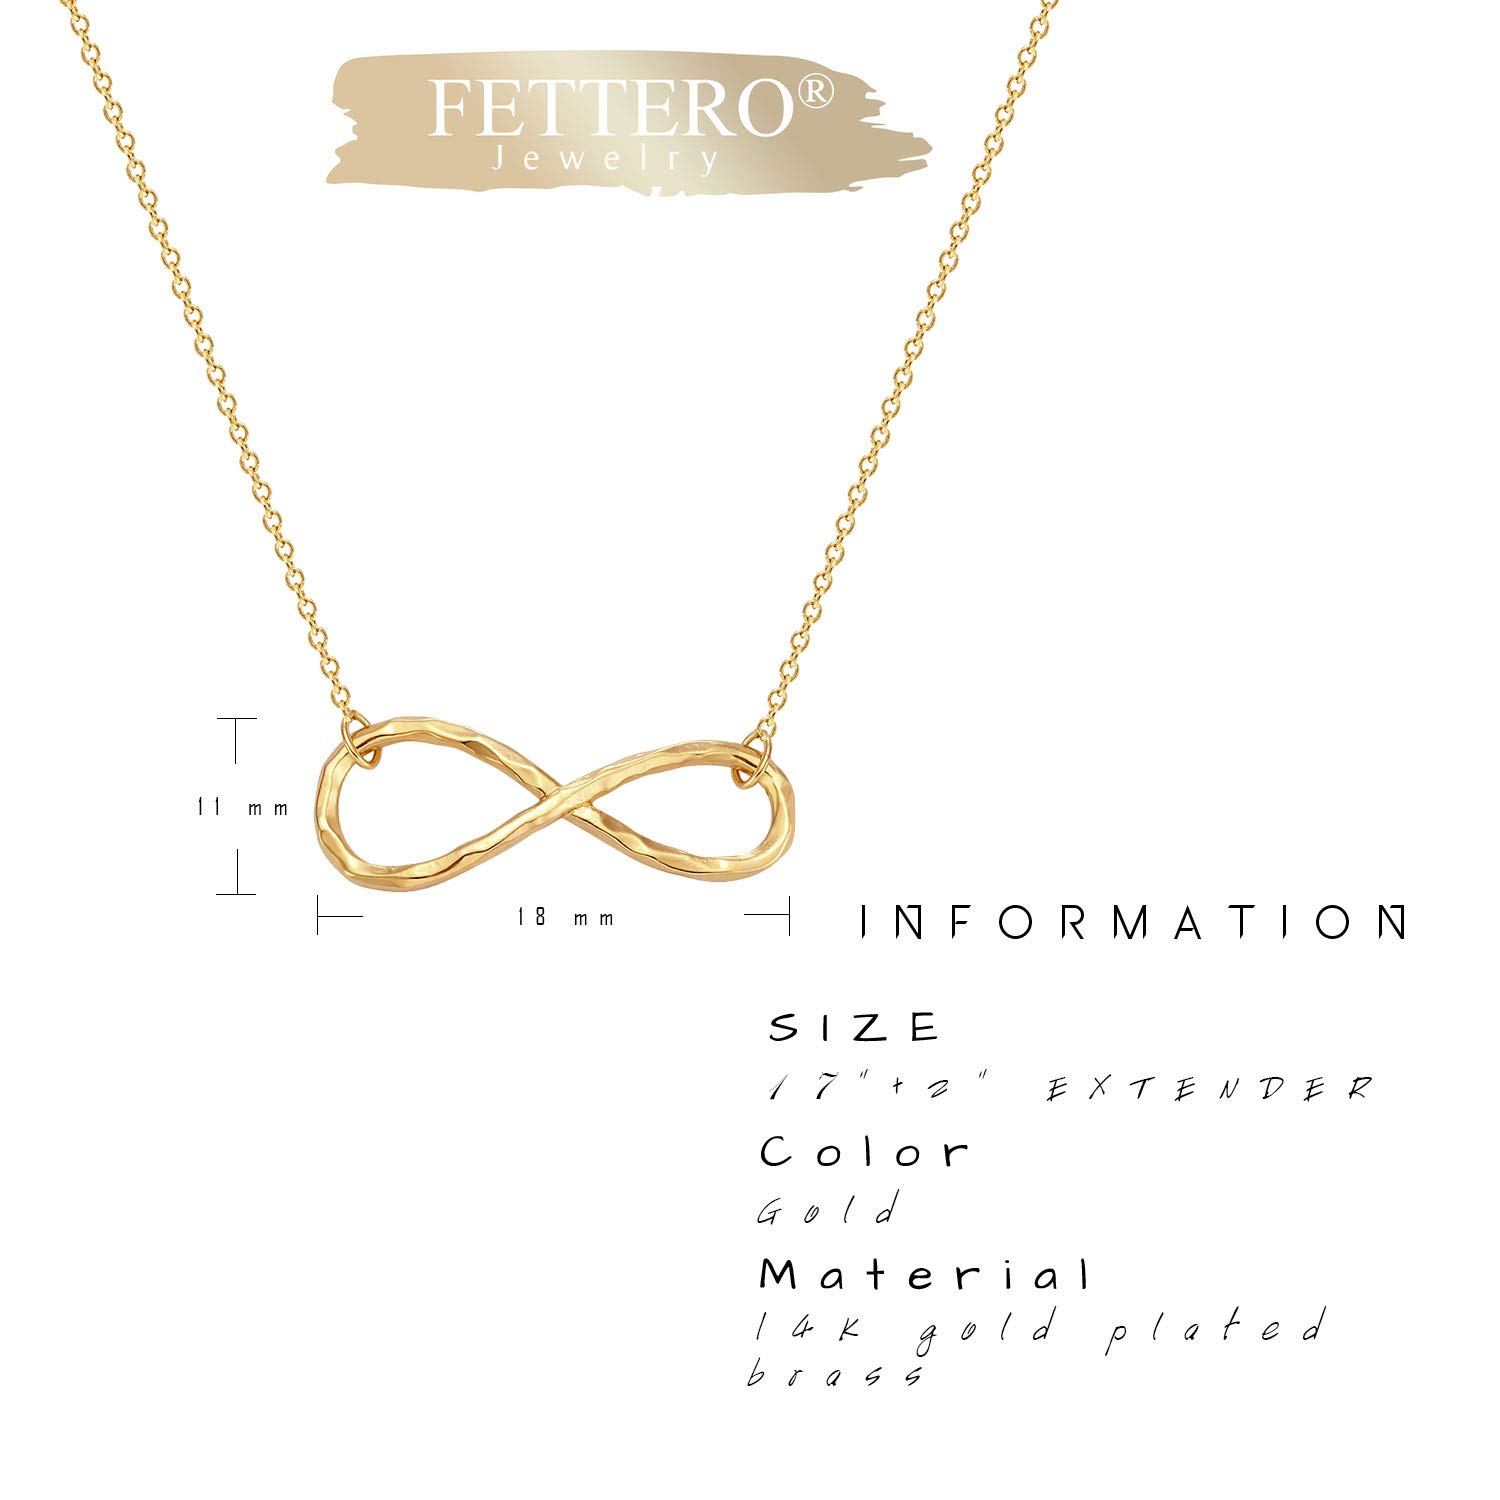 Fettero 14K Gold Plated Simple Double Circle Interlocking Infinity Hammered Pendant Necklace for Women Jewelry Gift - image 4 of 5